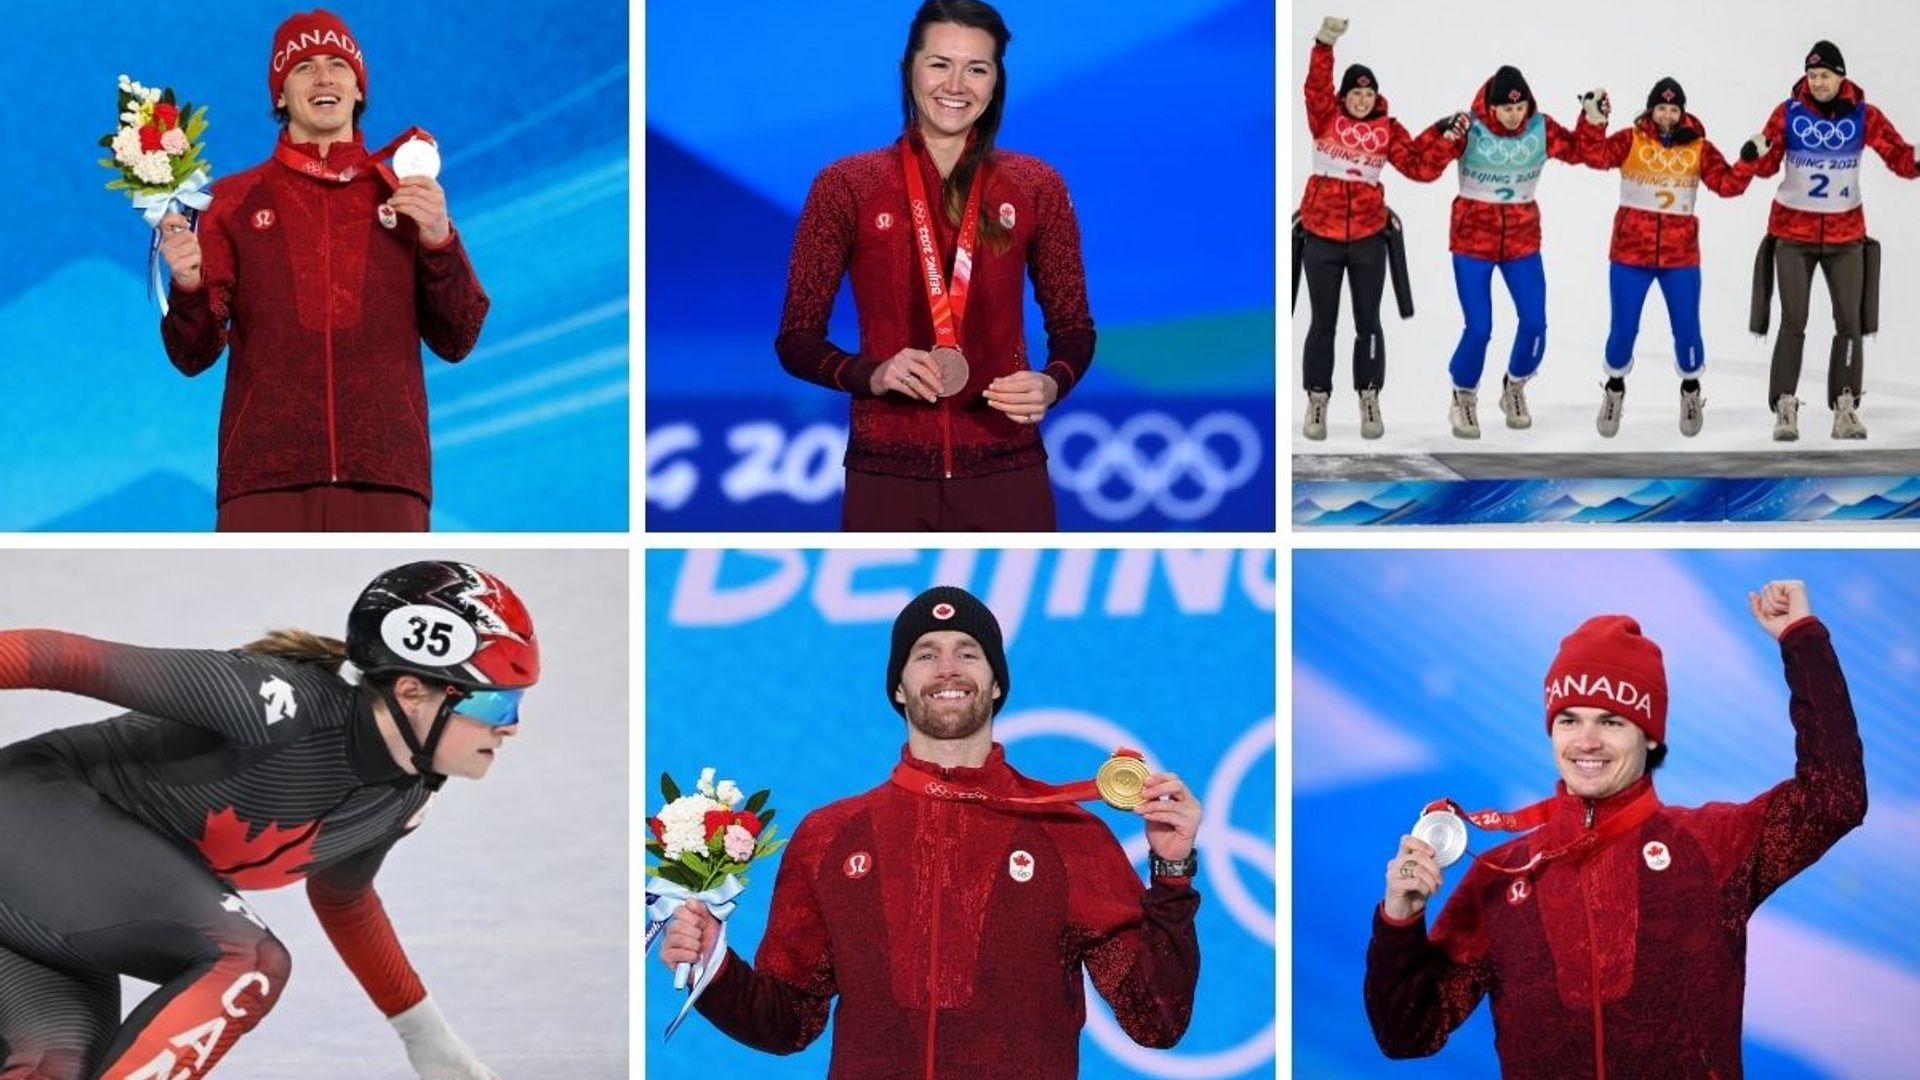 Go, Canada Go! Athletes who have taken home medals at the 2022 Beijing Winter Olympics so far